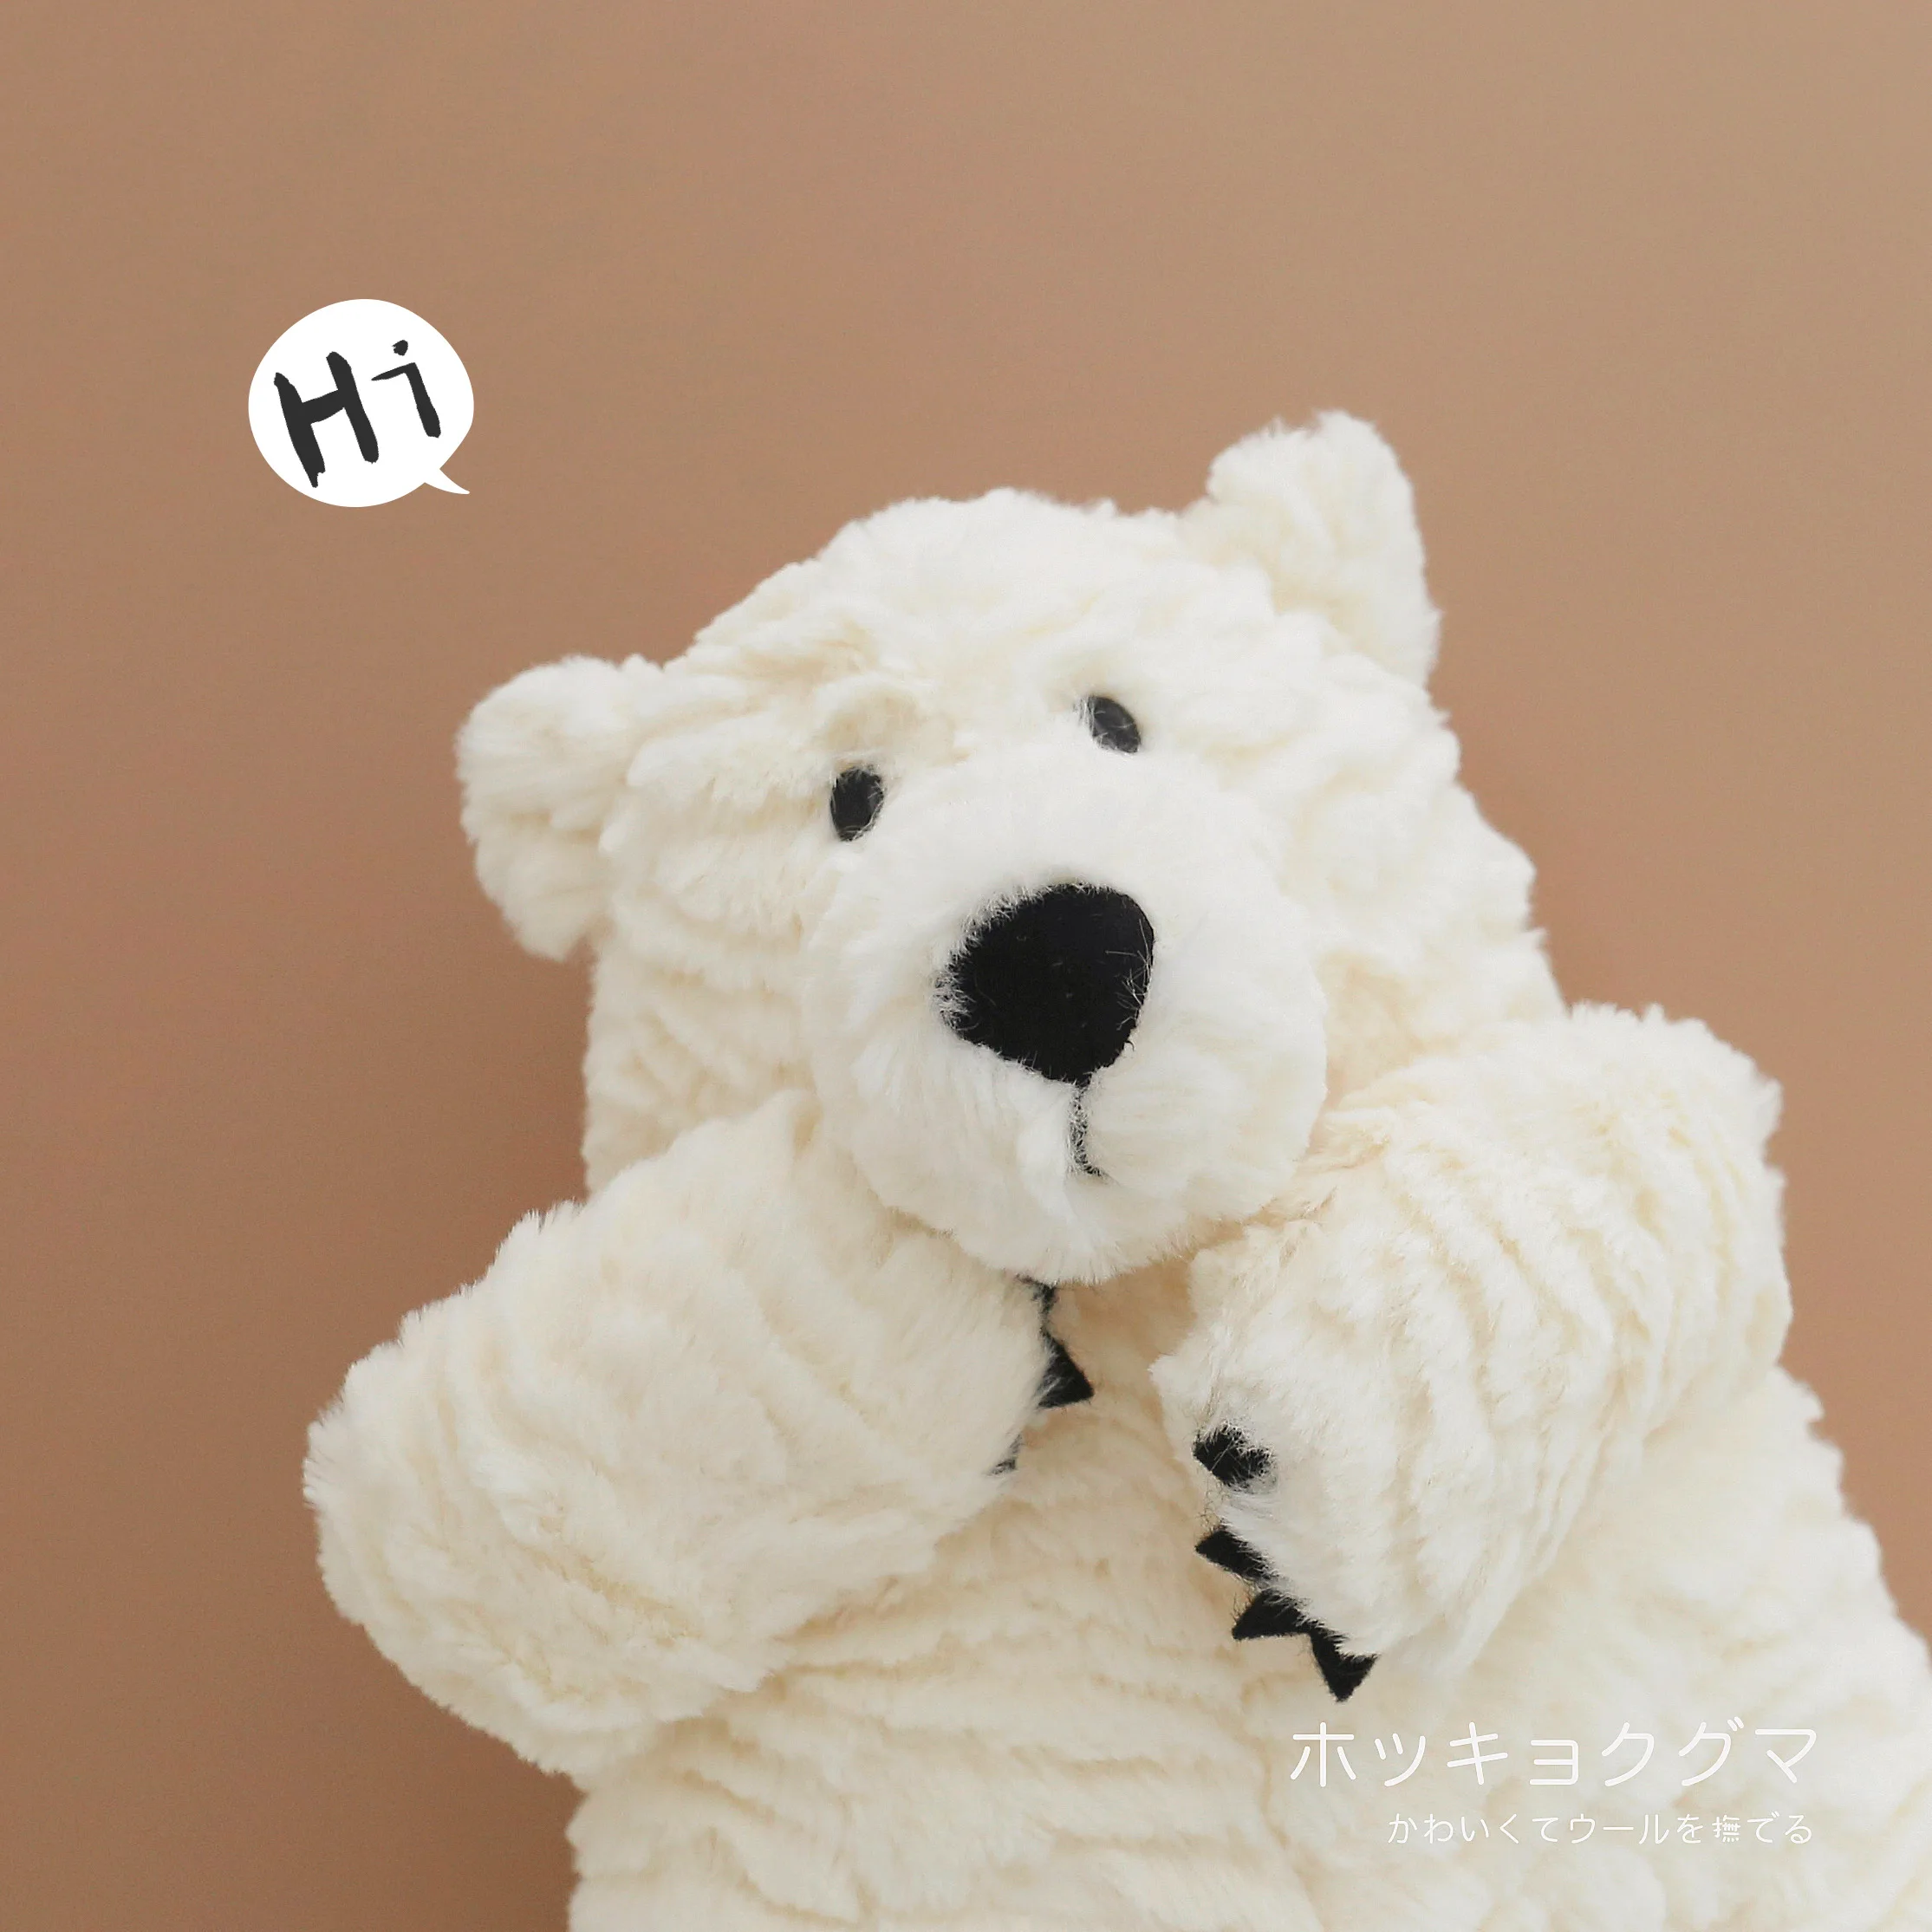 32cm Cute Polar Bear Plush Toy Stuffed Animal Cubby Furry White Bear Doll Sleeping Plushies Soft Appease Gifts For Child Girl images - 6